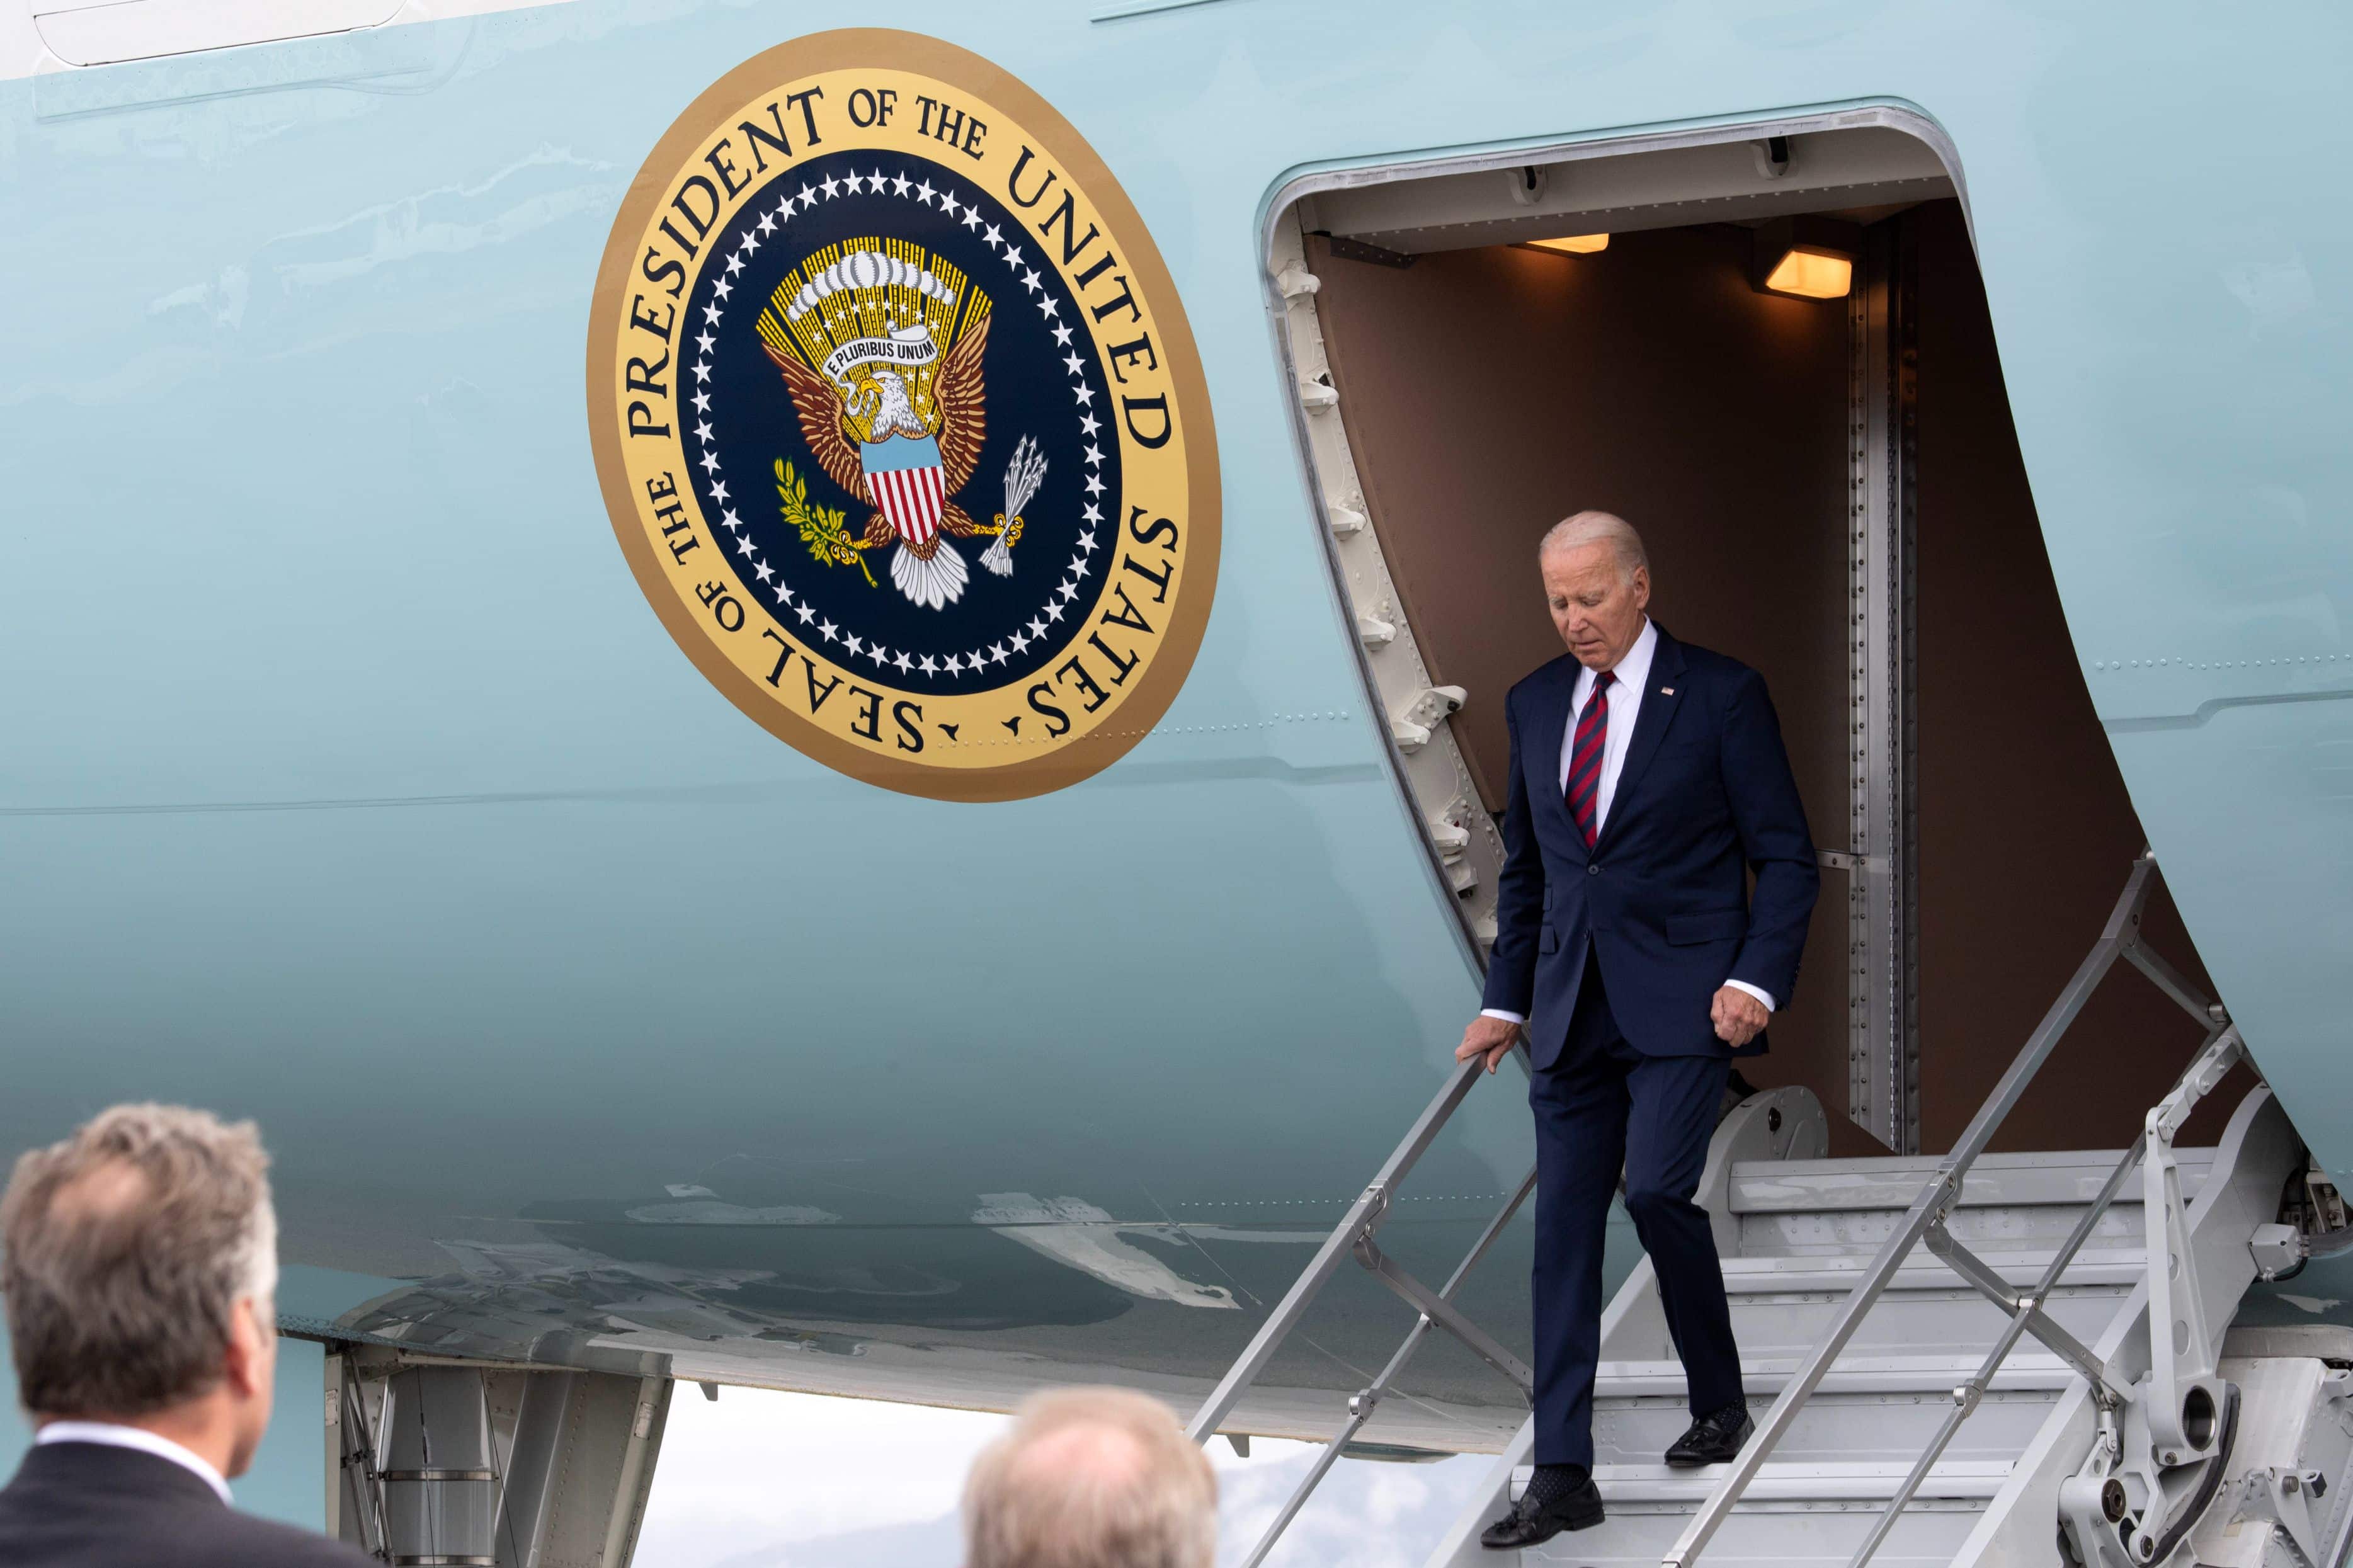 U.S. President Joe Biden exits Air Force One while visiting Joint Base Elmendorf-Richardson, Alaska, to commemorate the 22nd anniversary of the terrorist attacks of 9/11, Sept. 11, 2023. Biden highlighted continued commitment to defense of the nation and support to allies as an on-going tribute to the lives lost that day. (U.S. Air Force photo by Alejandro Peña)